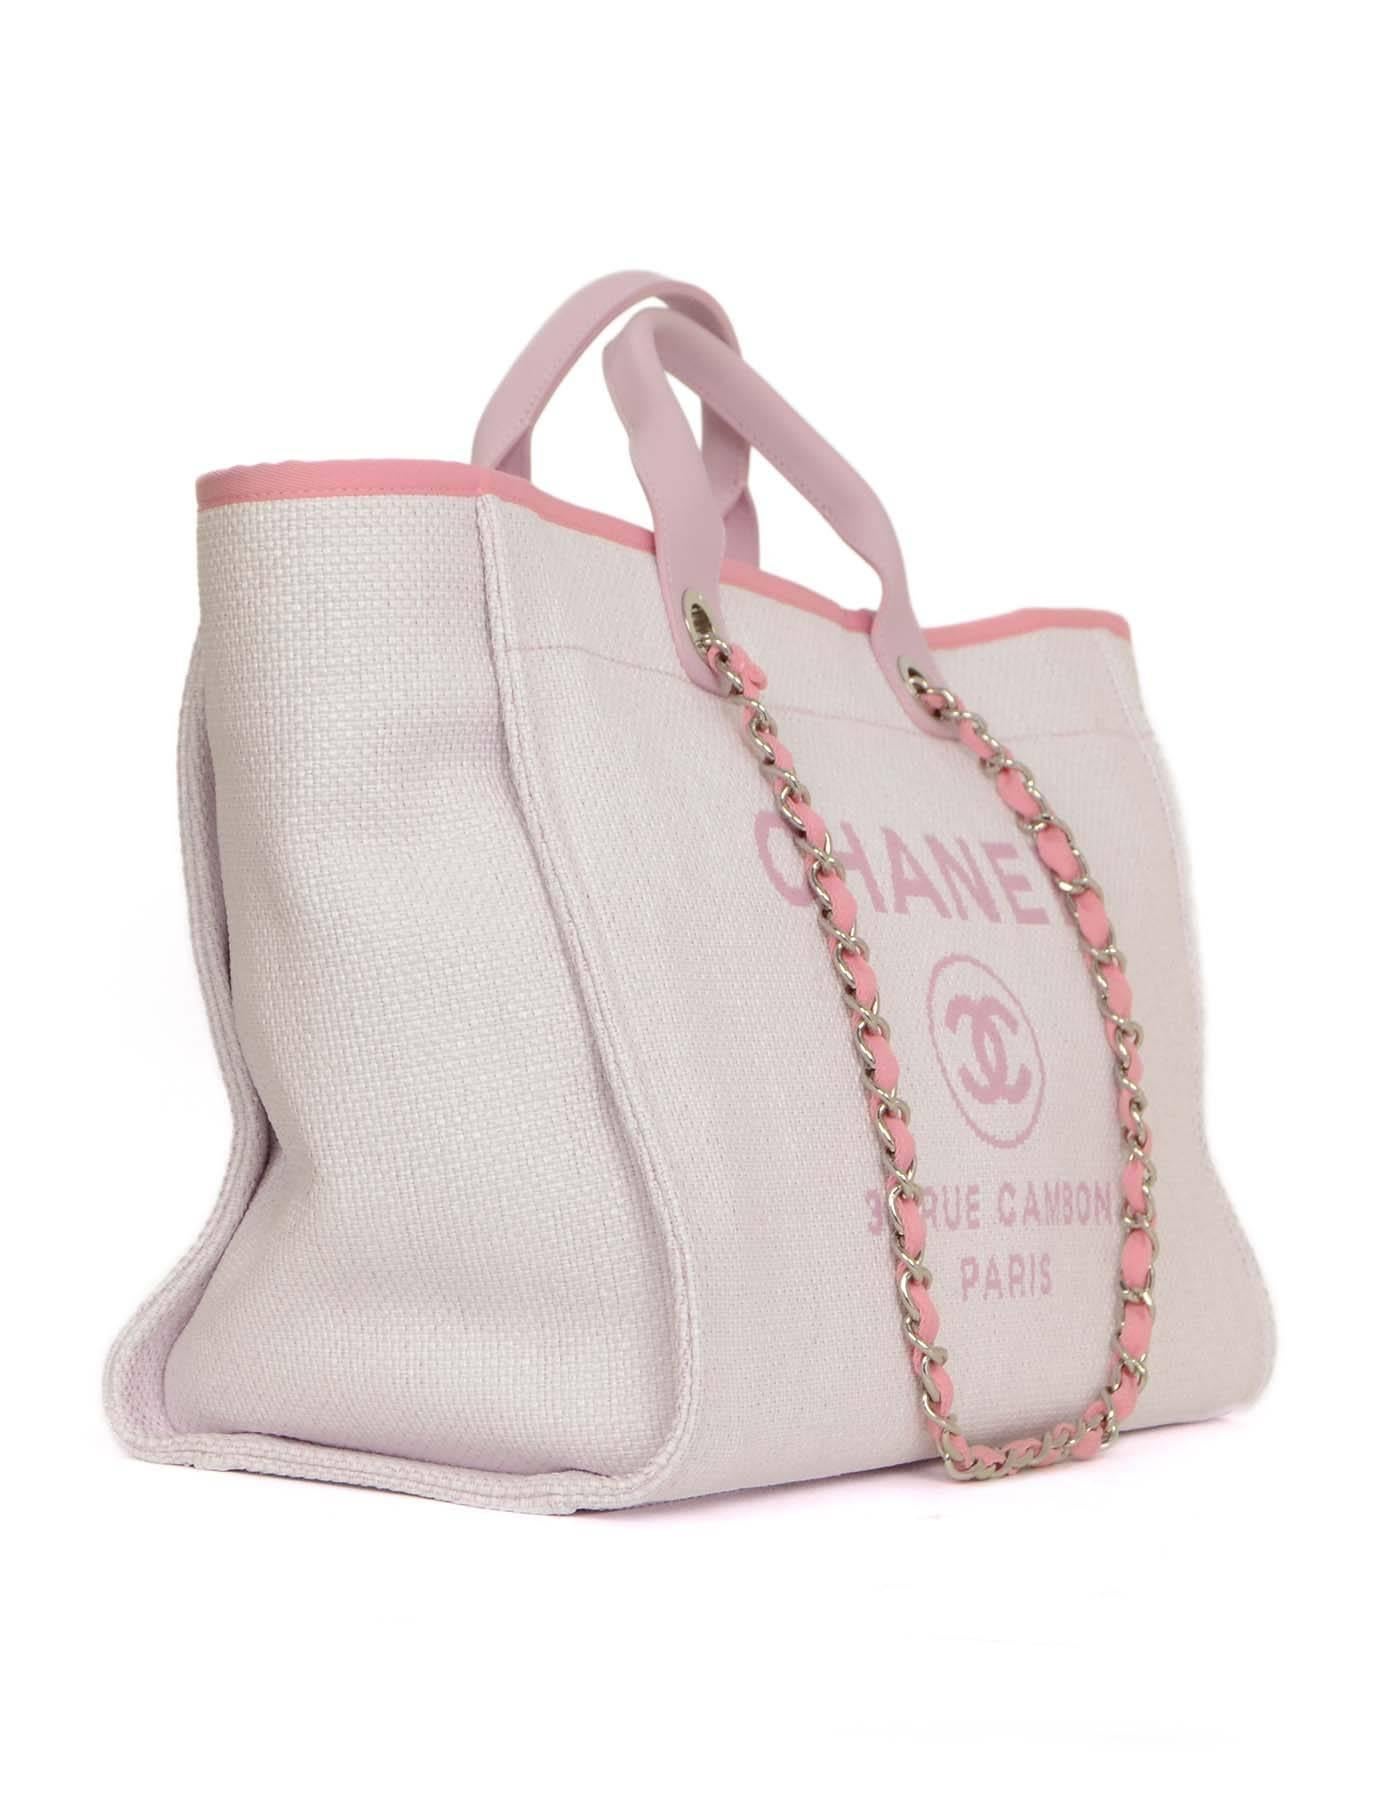 Chanel Pink Canvas Deauville Tote 
Features short pink leather handles and longer chain link pink canvas woven shoulder straps
Made in: Italy
Year of Production: 2015
Color: Pink and ivory
Hardware: Silvertone
Materials: Canvas, leather and